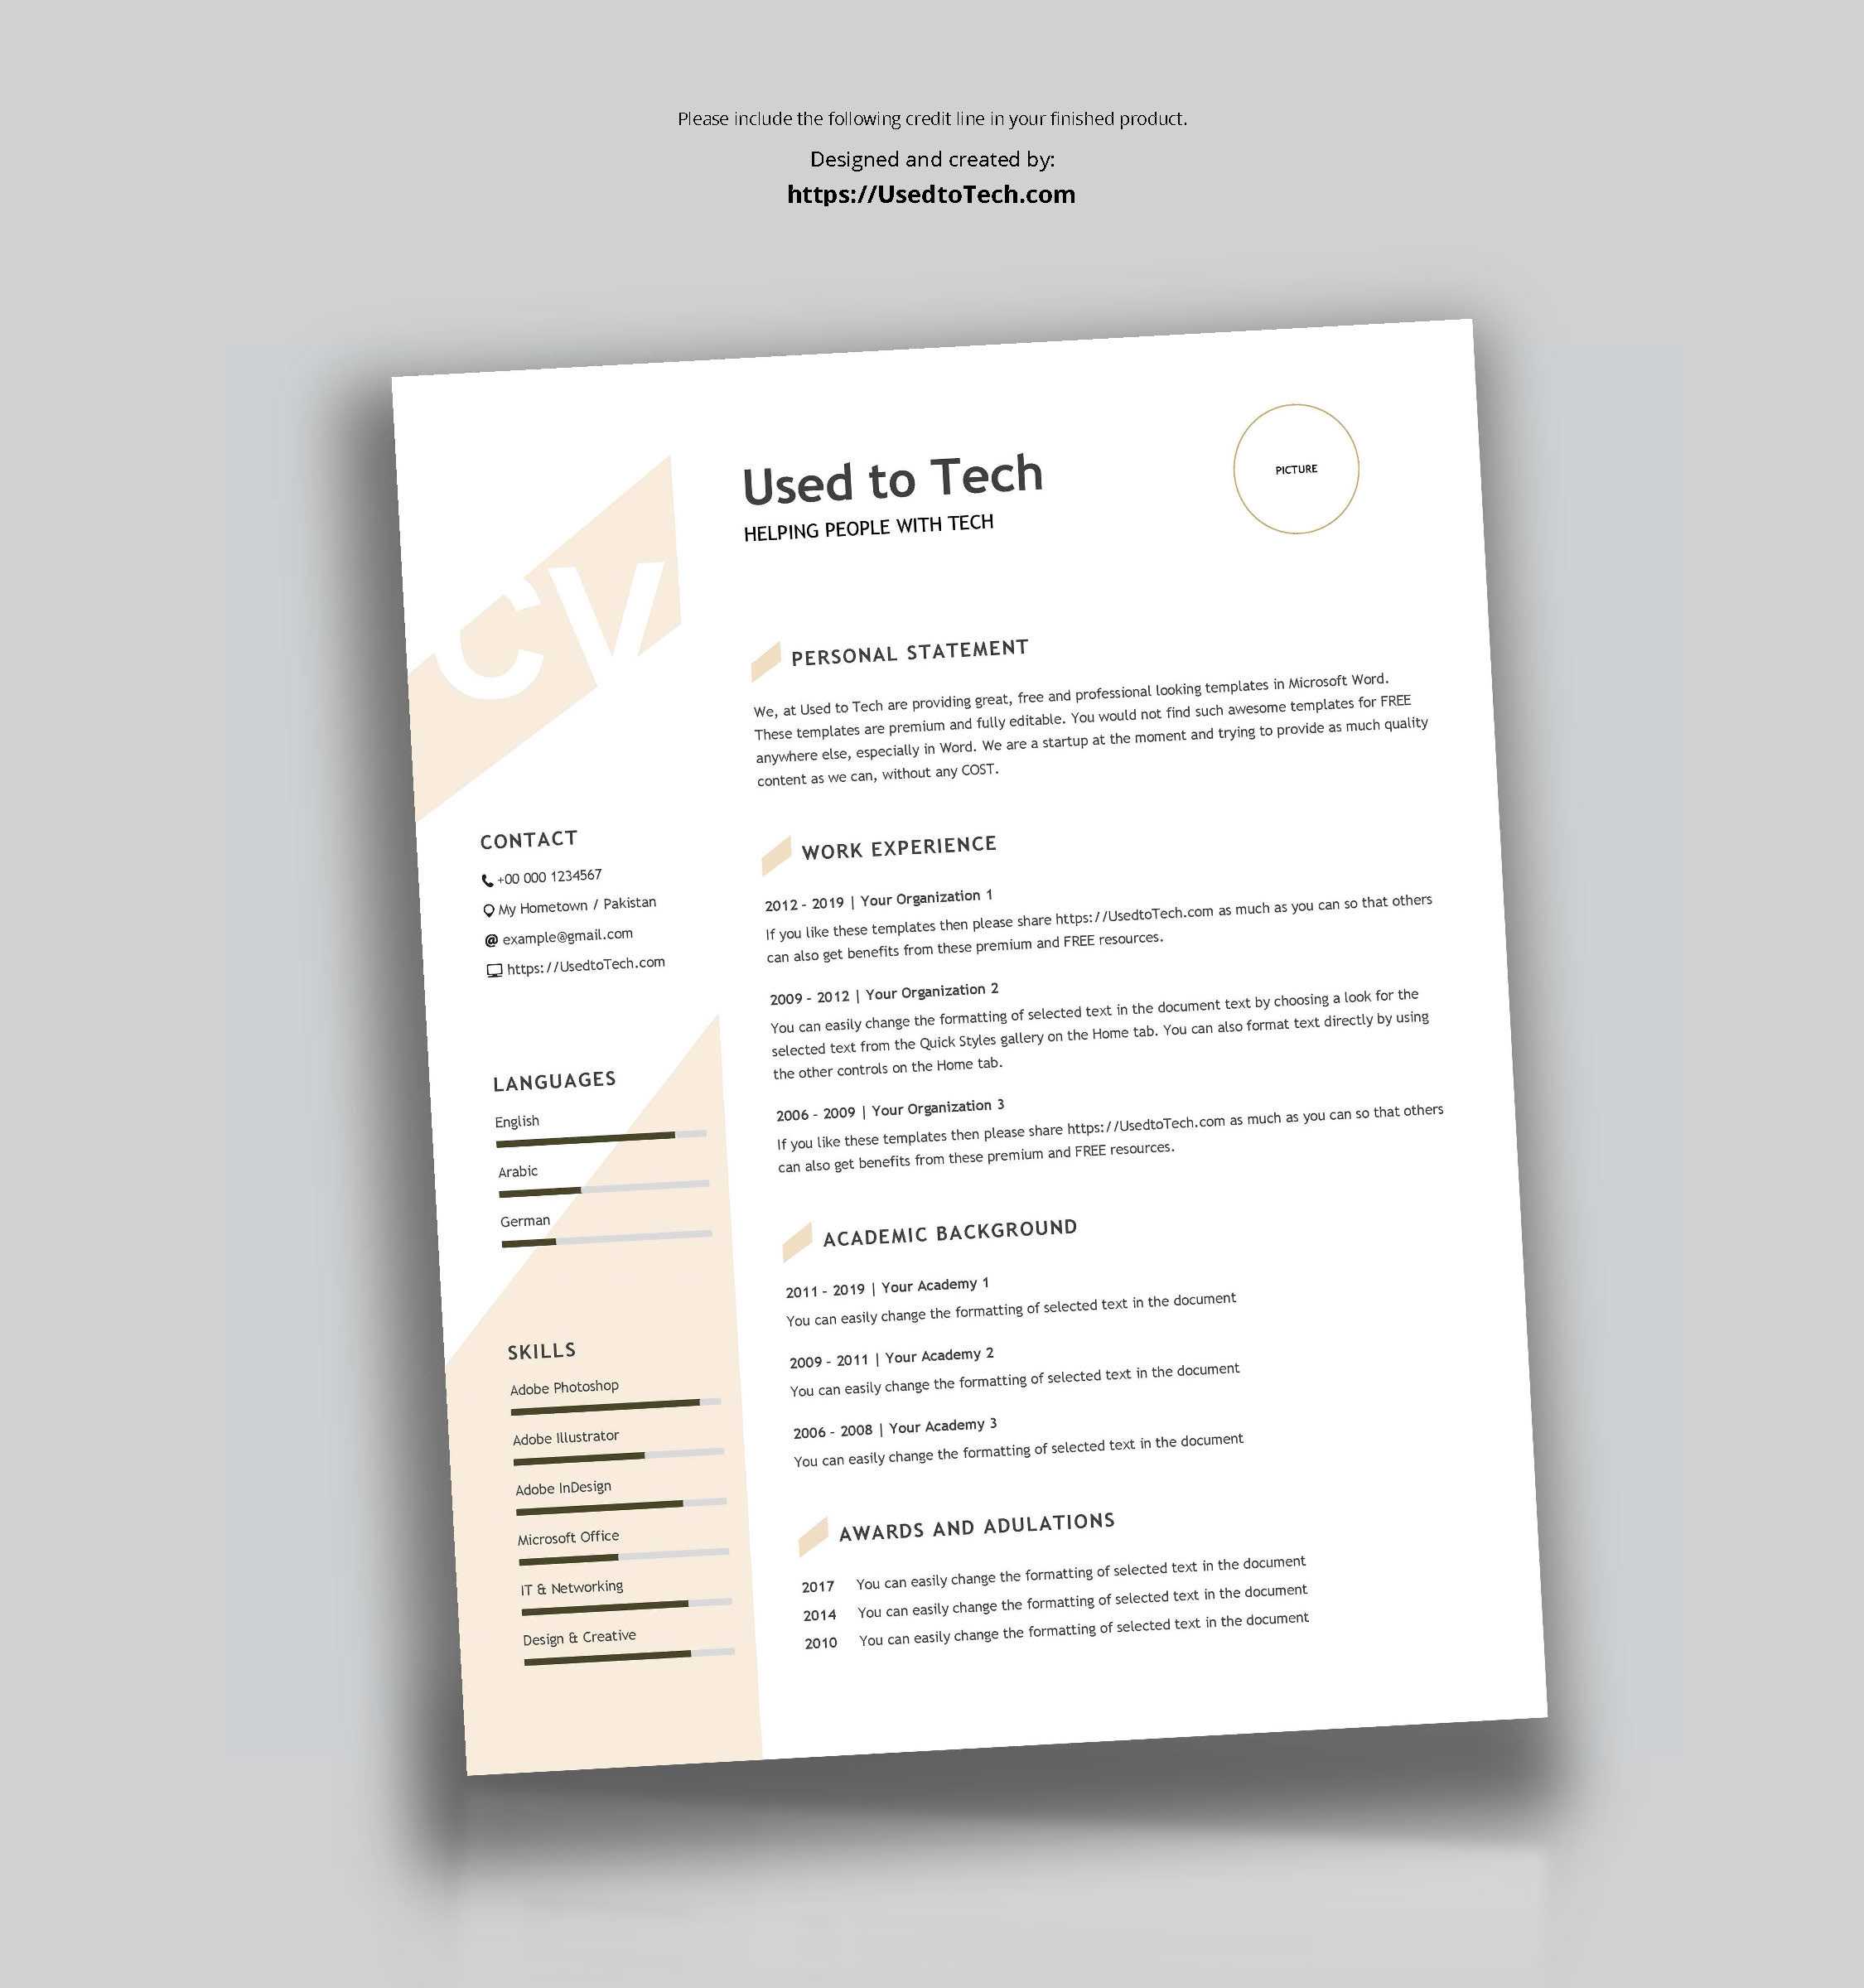 Modern Resume Template In Word Free – Used To Tech Throughout How To Find A Resume Template On Word